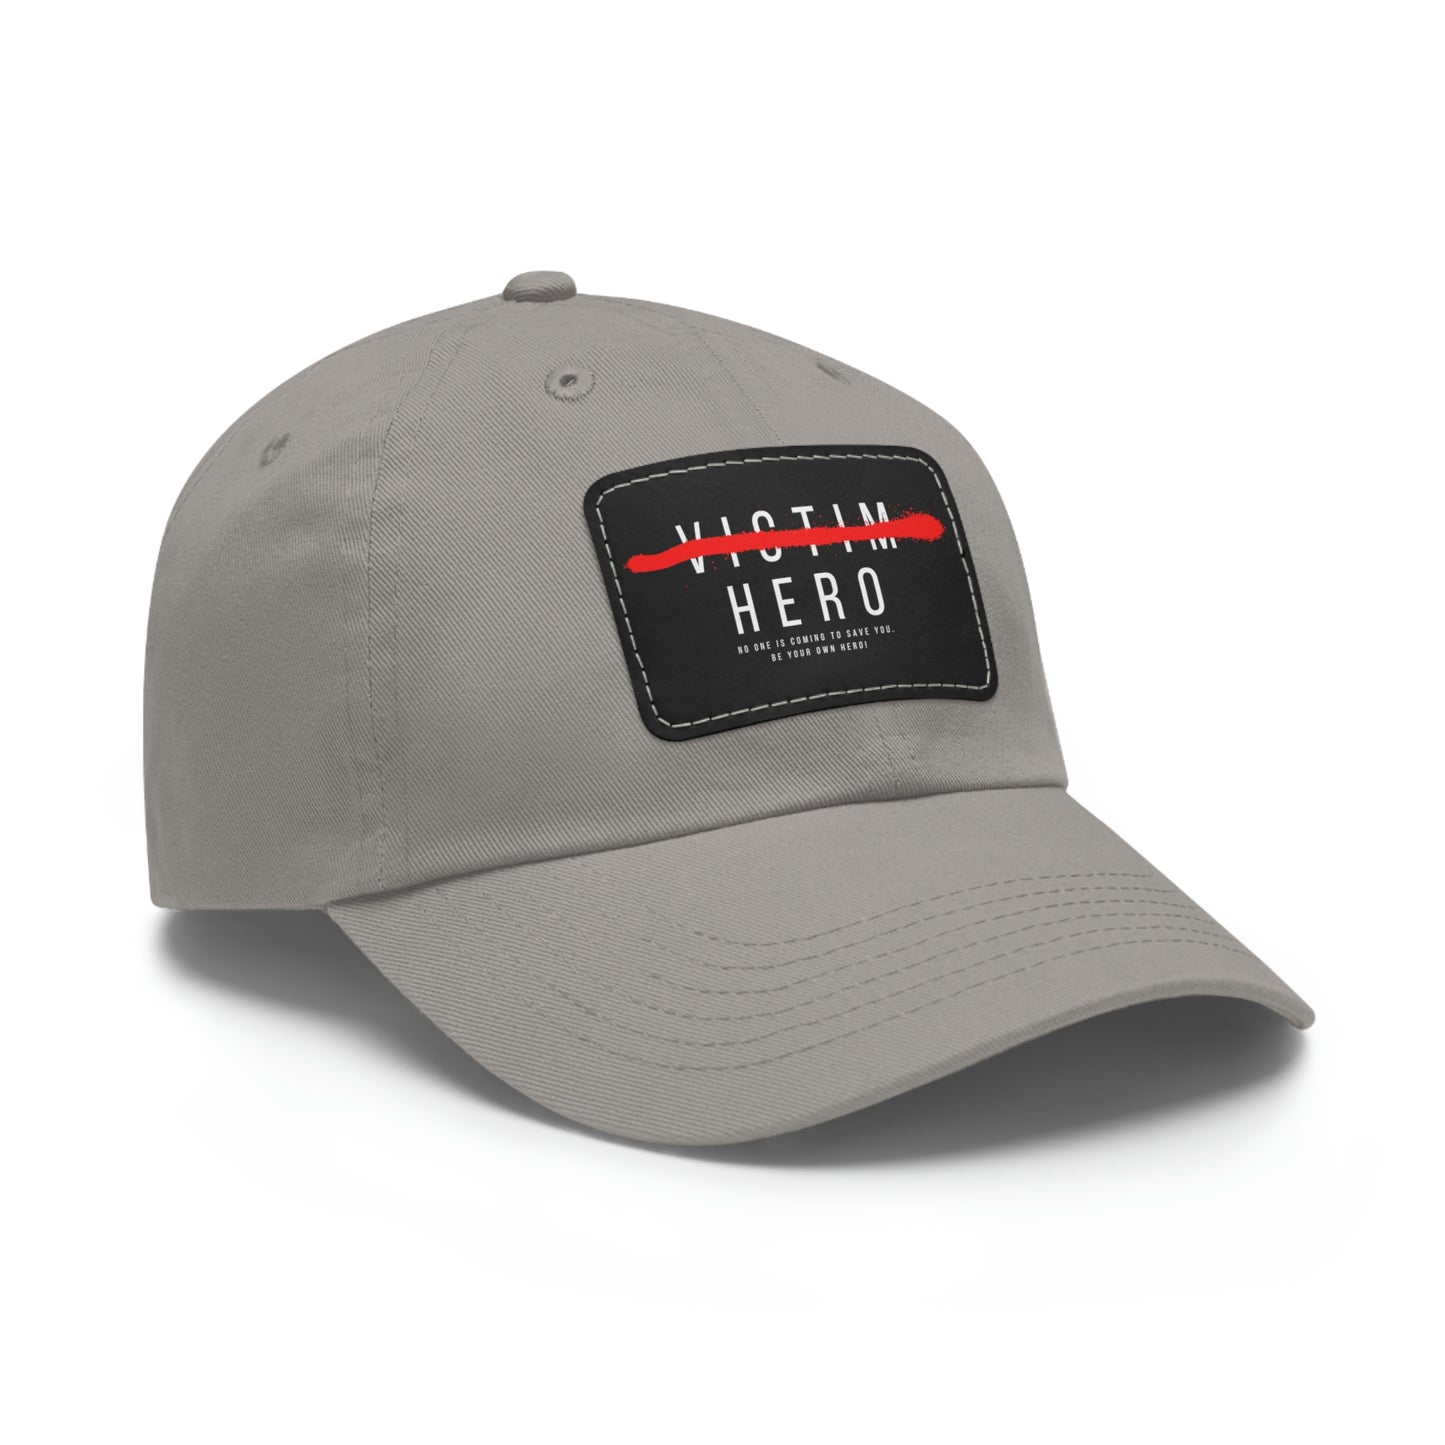 HERO Dad Hat with Leather Patch